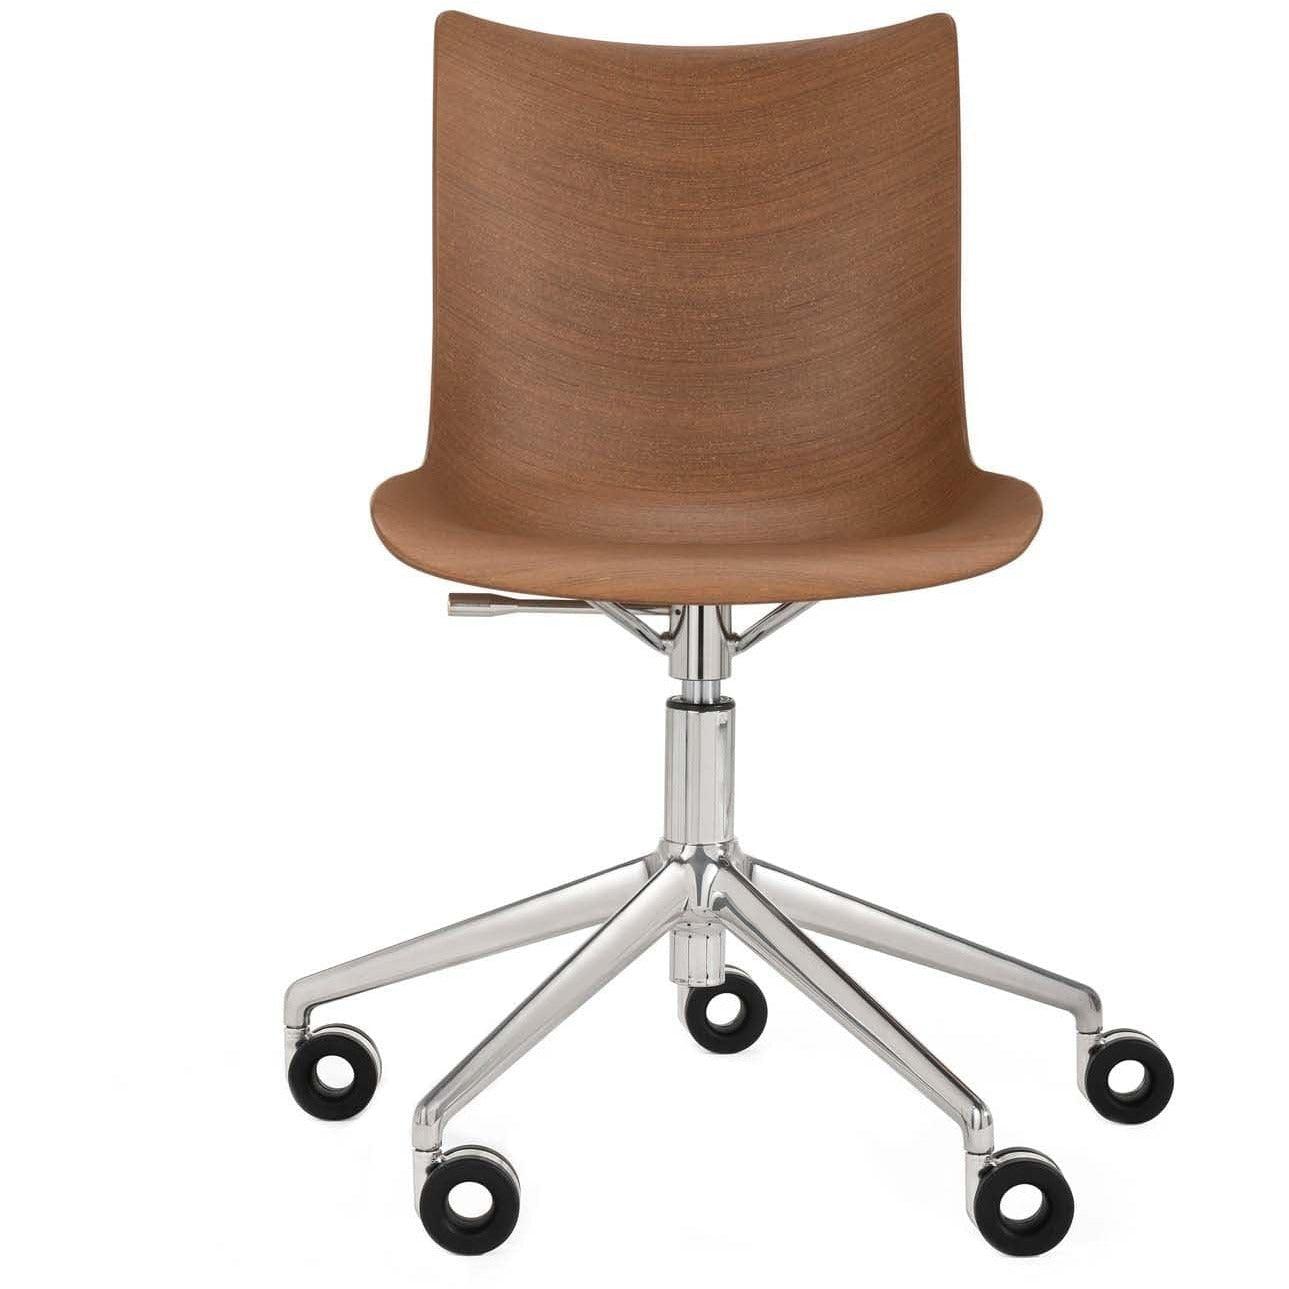 P/Wood Adjustable Height Desk Chair with Wheels - Curated - Furniture - Kartell